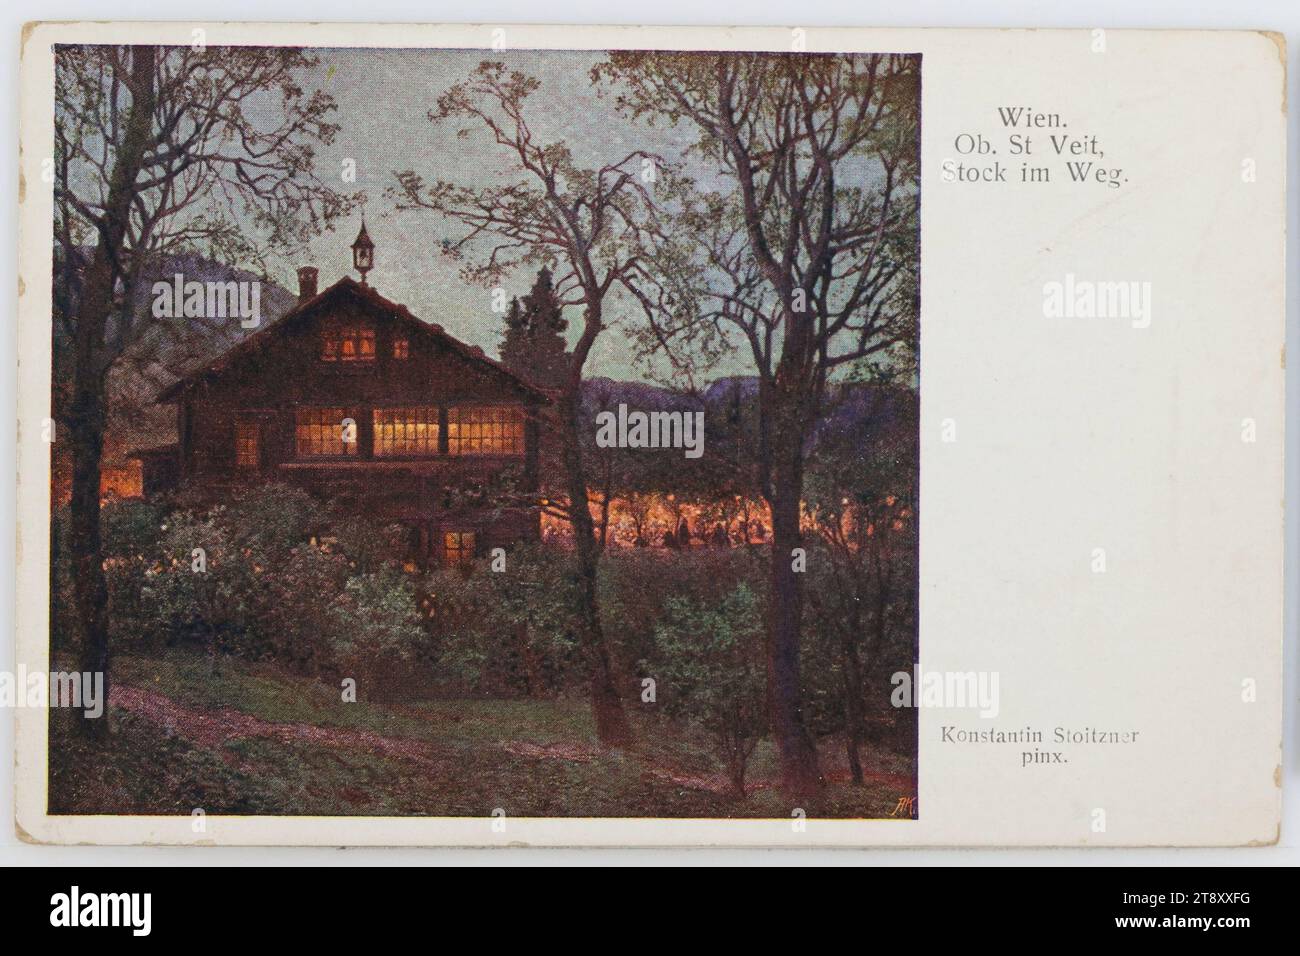 13th, Ober-St.-Veit - Stock im Weg, in der Dämmerung, picture postcard, 1920, coated paperboard, halftone print, Hotel and Restaurant Industry, Vienna Woods, Recreation and Leisure, Media and Communication, Postcards with transliteration, 13th District: Hietzing, with people, handwriting, written text, The Vienna Collection Stock Photo